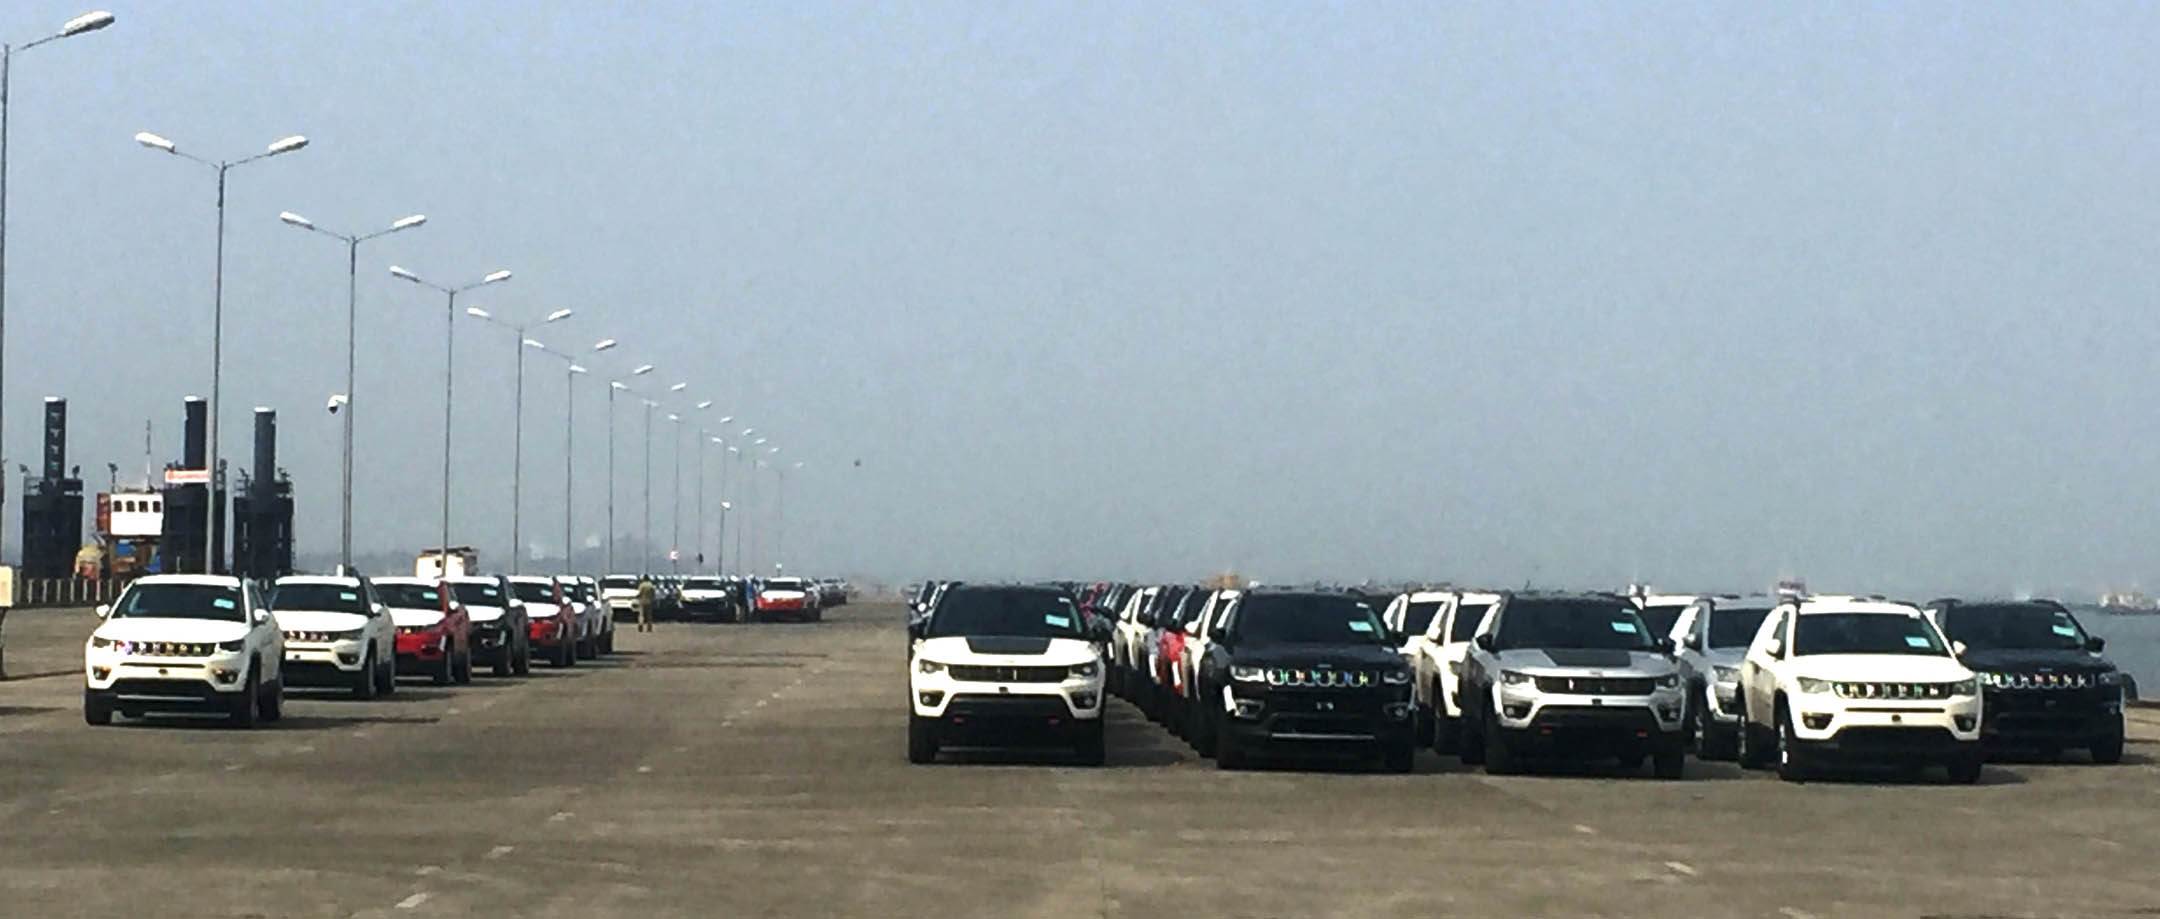 first-batch-of-the-jeep-compass-at-bombay-port-trust-ready-to-be-shipped-to-japan-and-australia-2